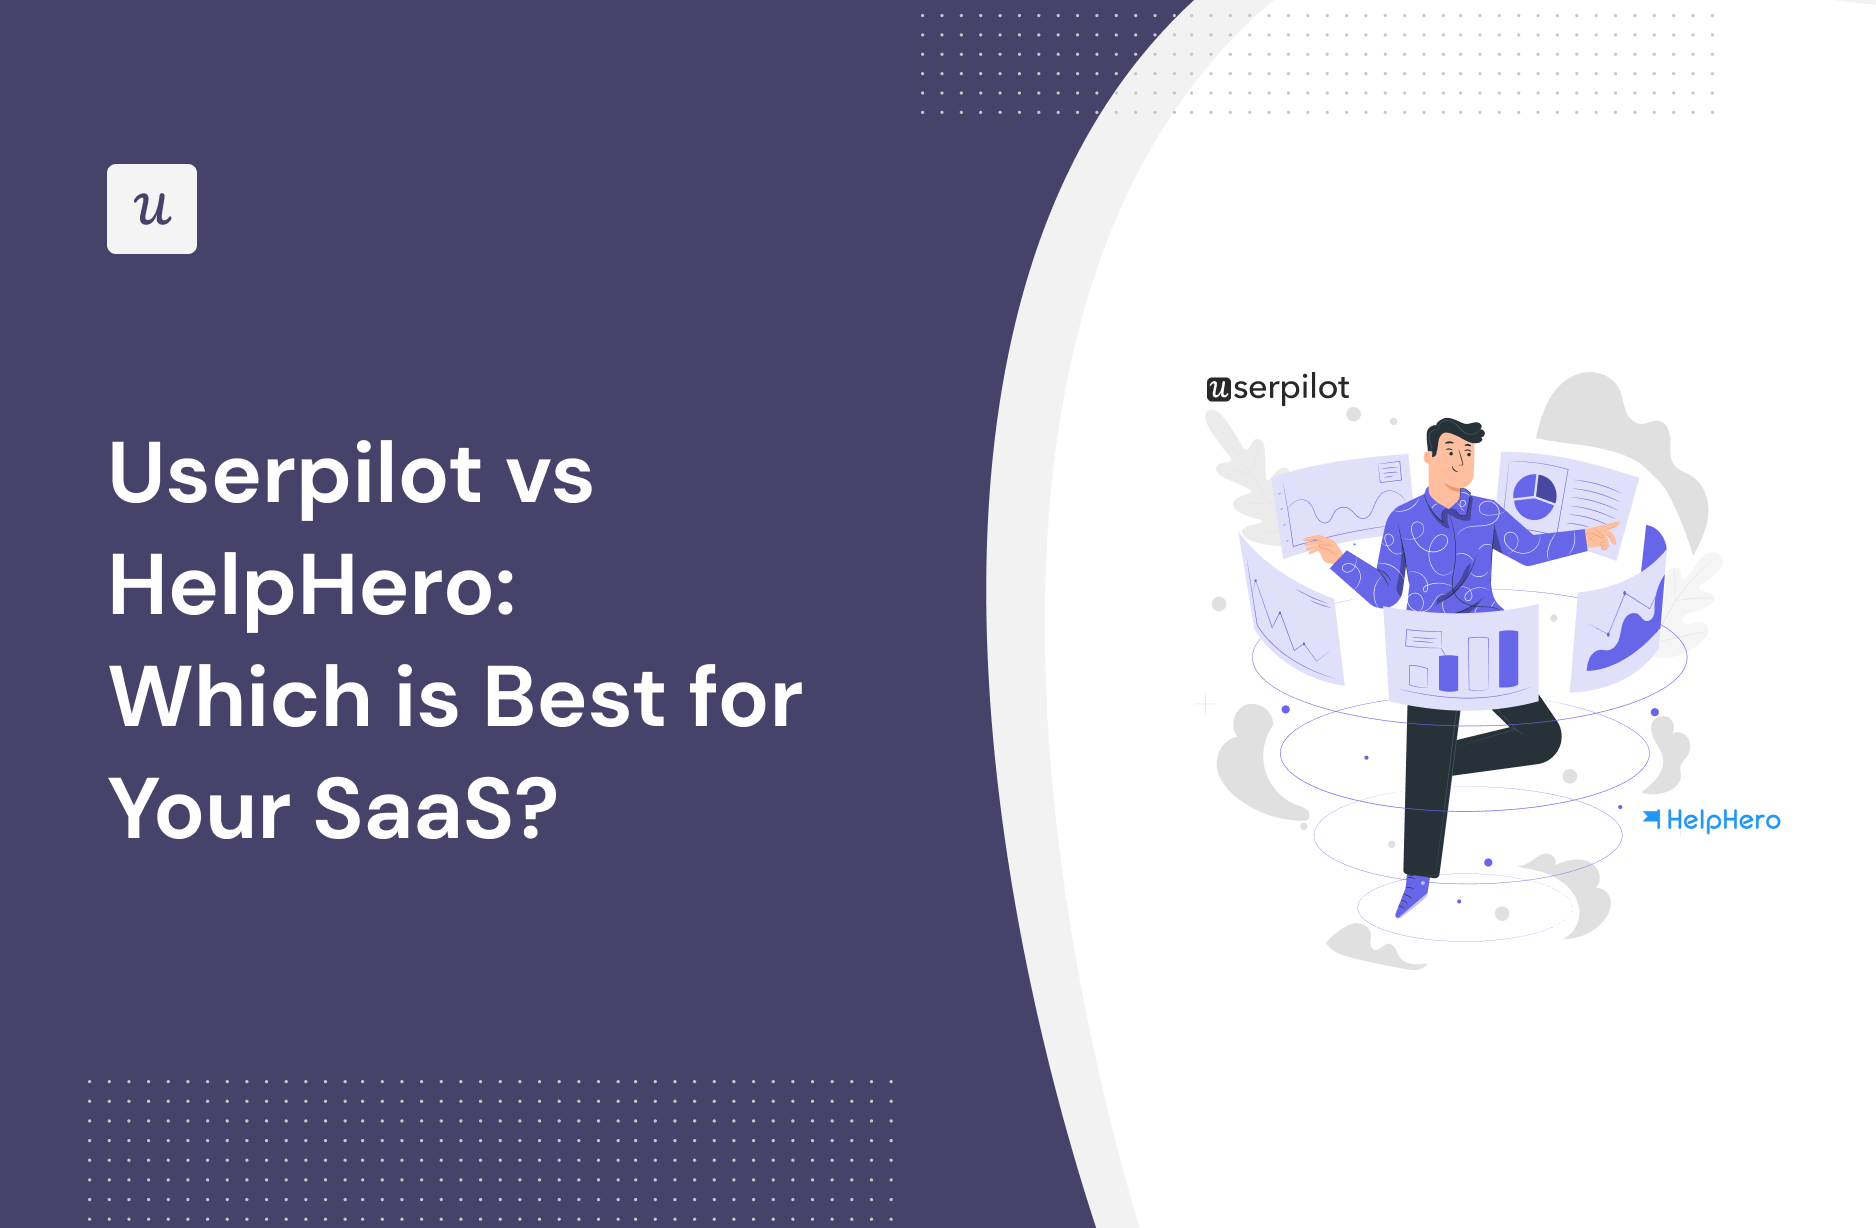 Userpilot vs HelpHero: Which Is Best for Your SaaS?